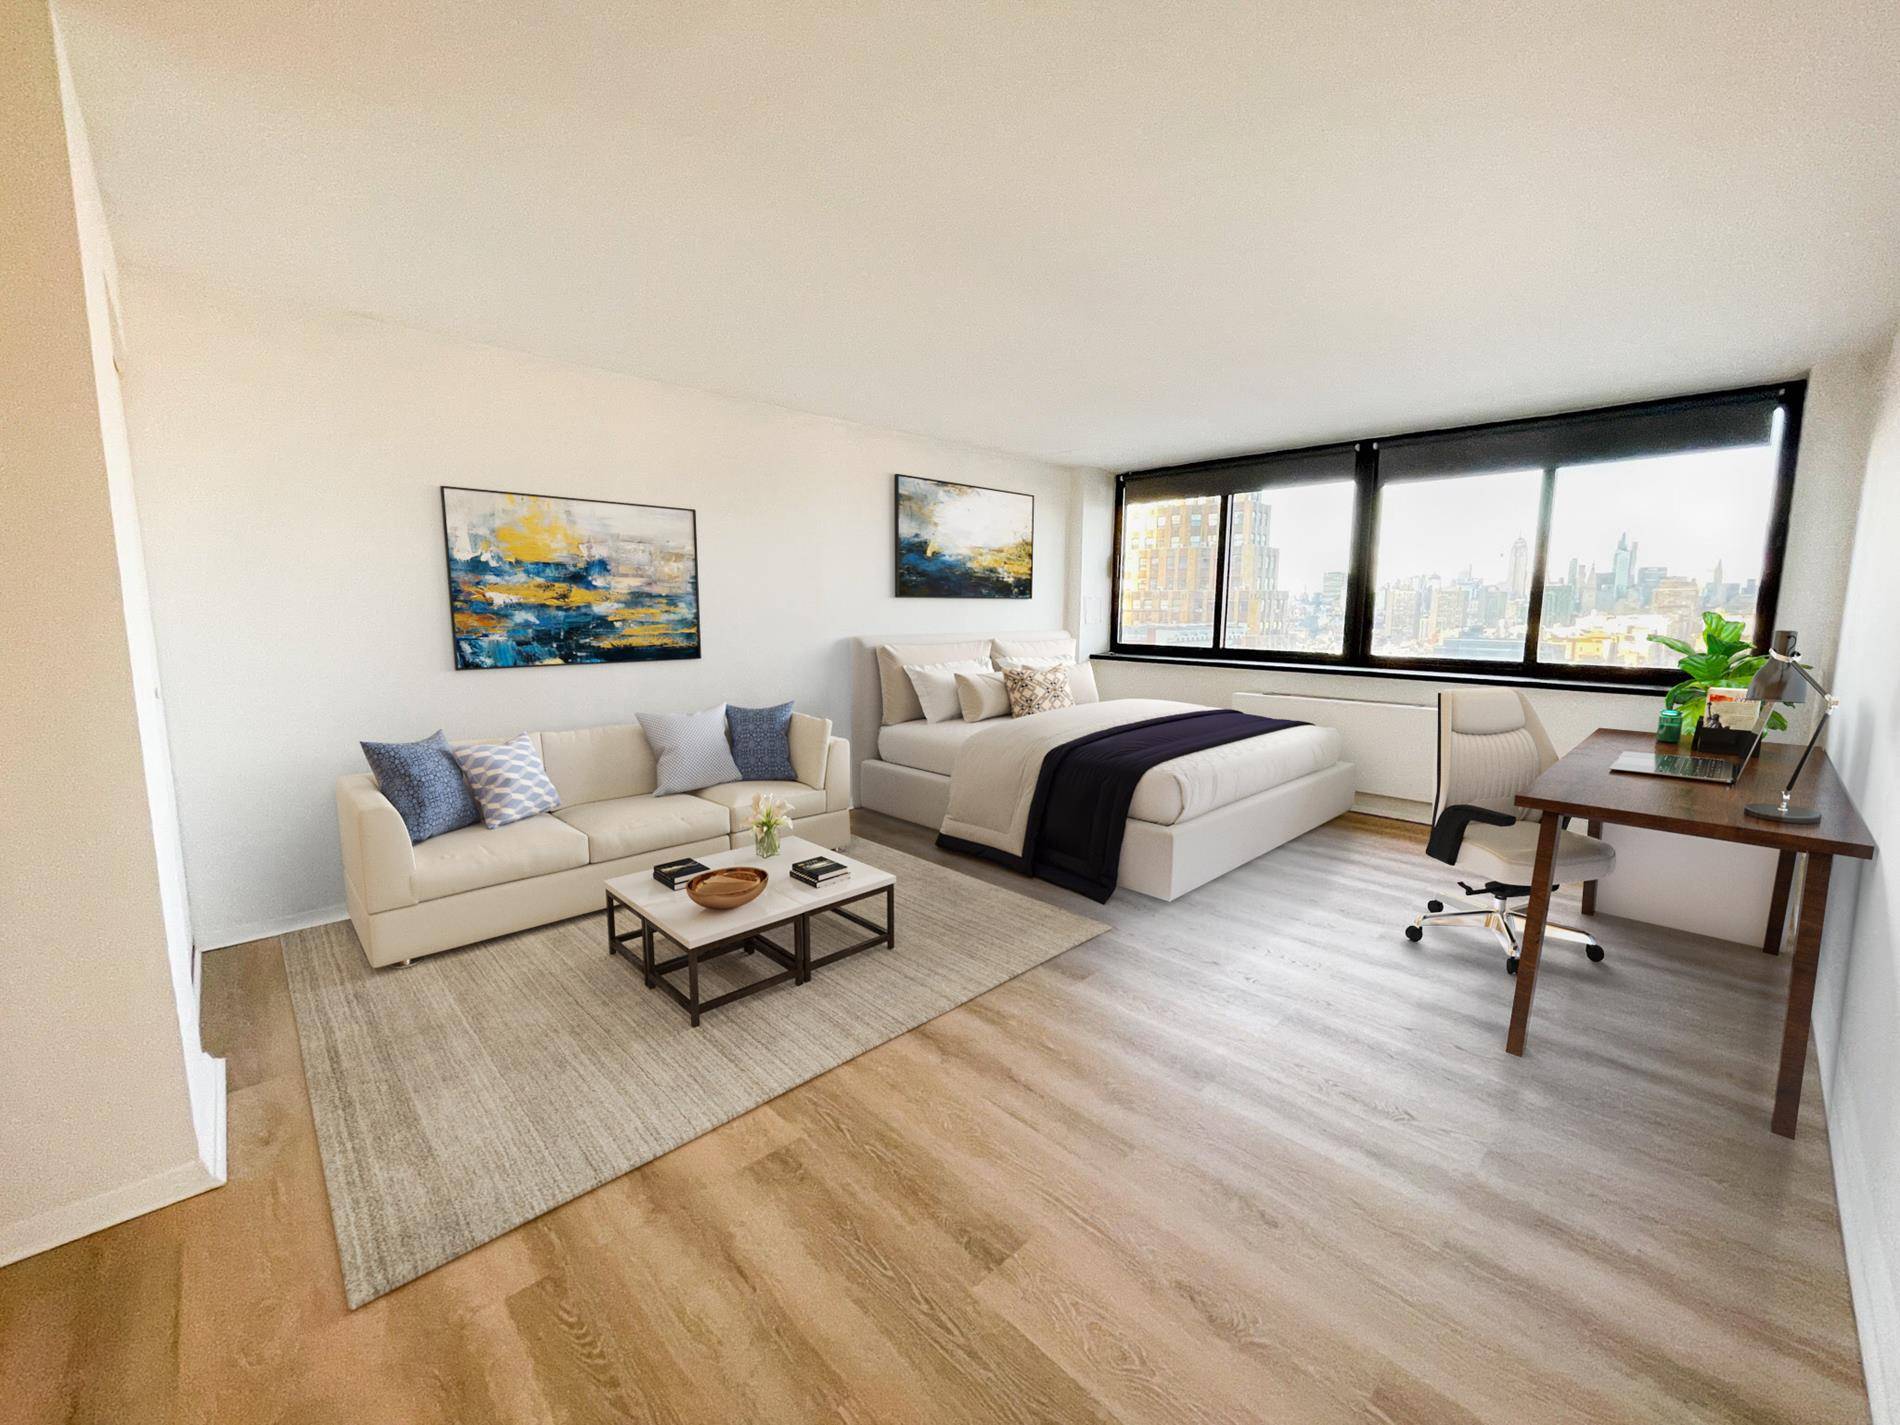 Welcome to a desirable Tribeca home at 376 Broadway, a 465 square feet studio condominium with a stunning, unobstructed view of the Empire State Building.